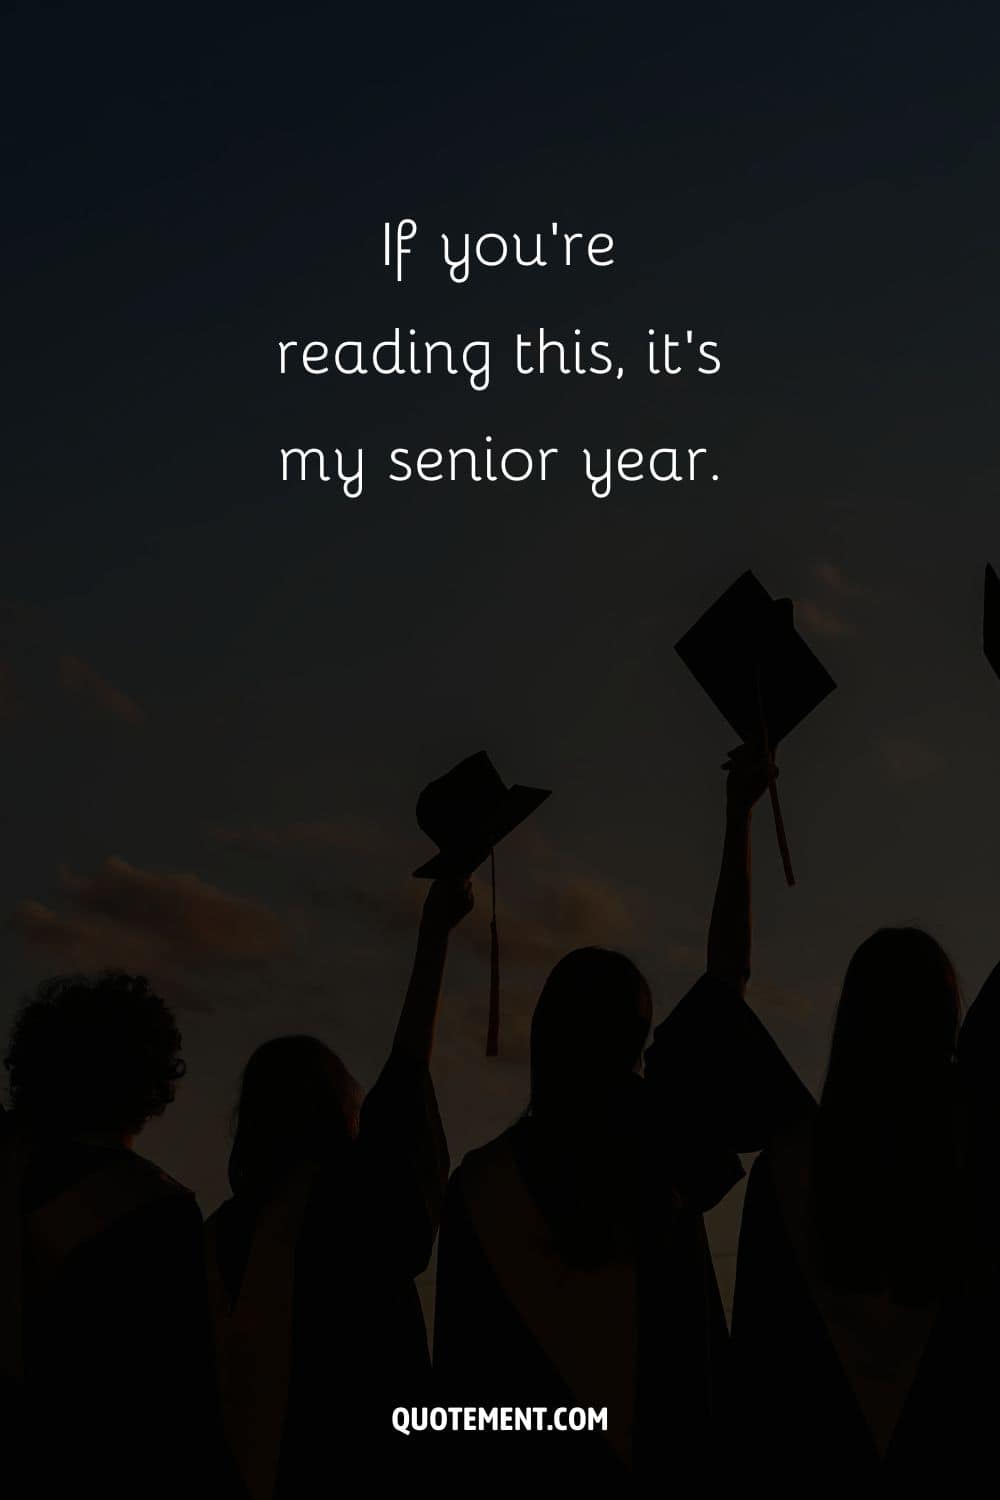 If you’re reading this, it’s my senior year.